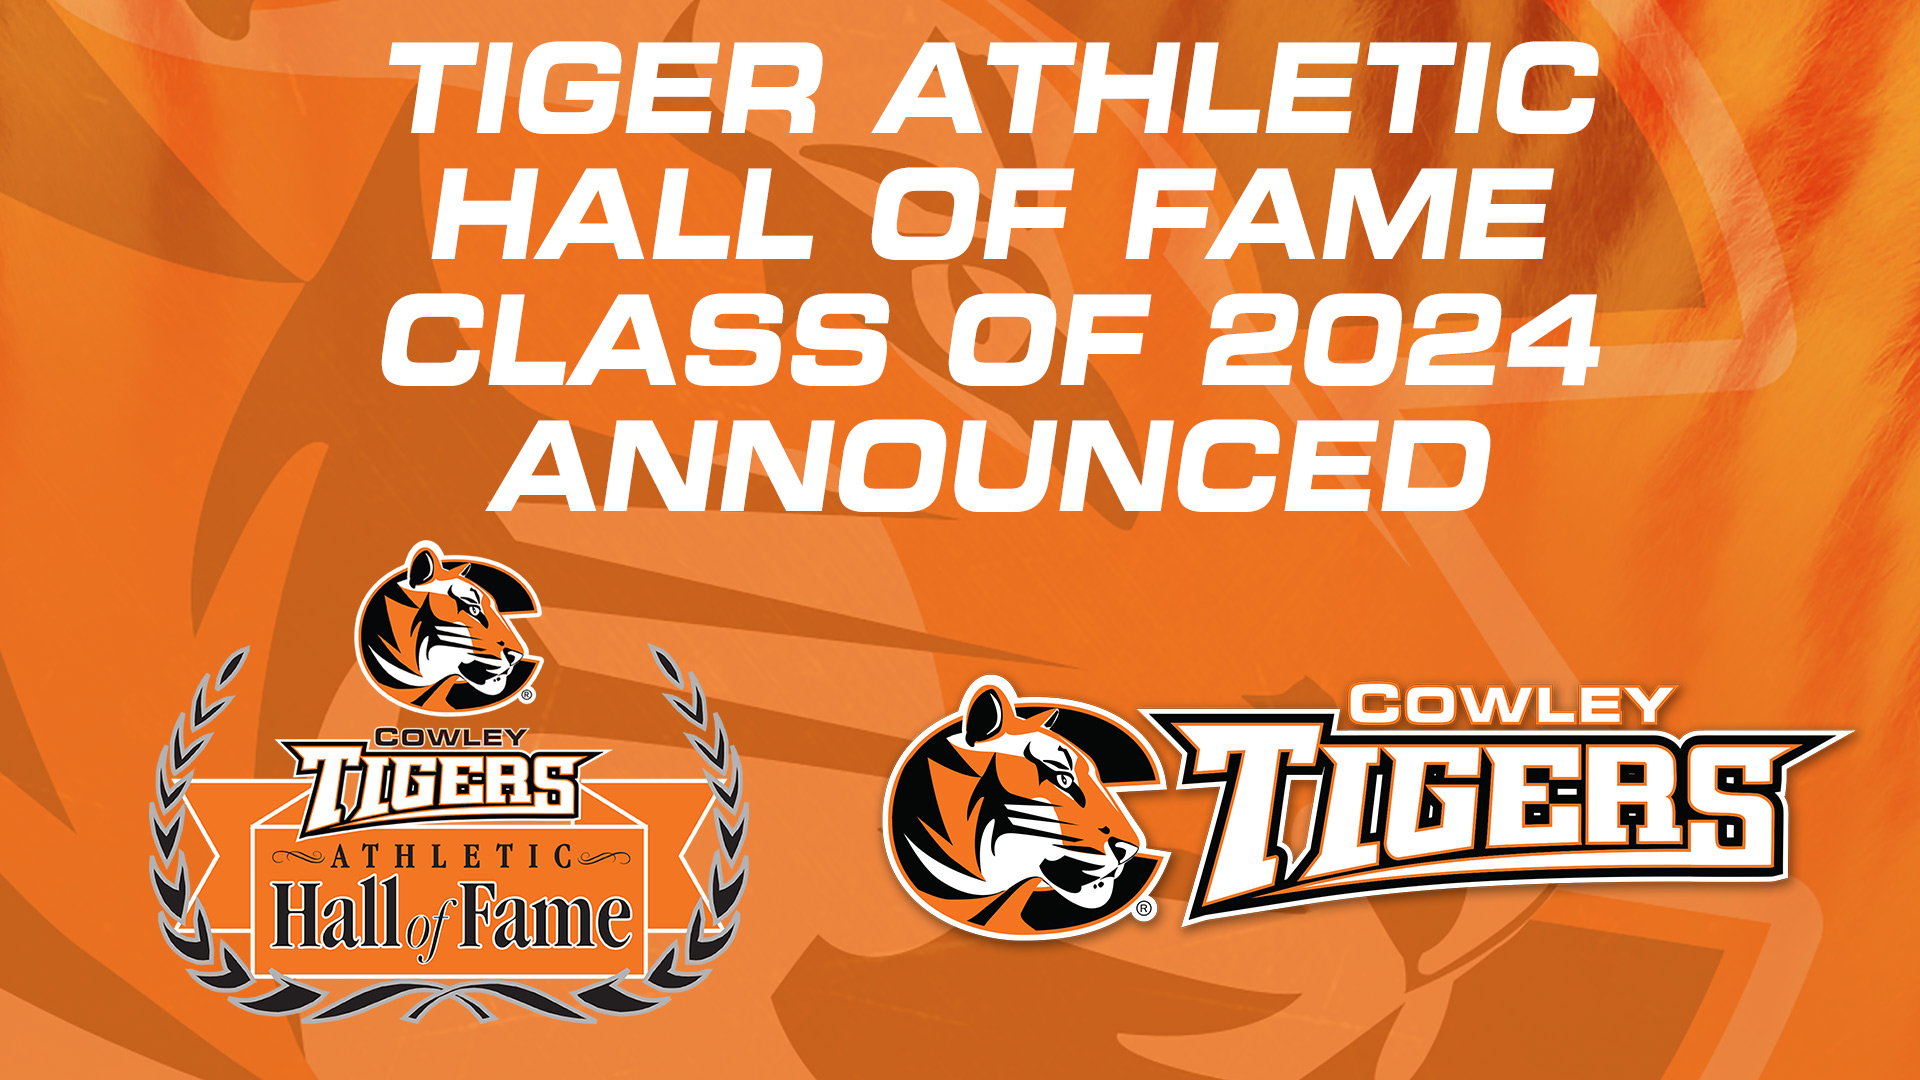 Tiger Athletic Hall of Fame Class of 2024 announced